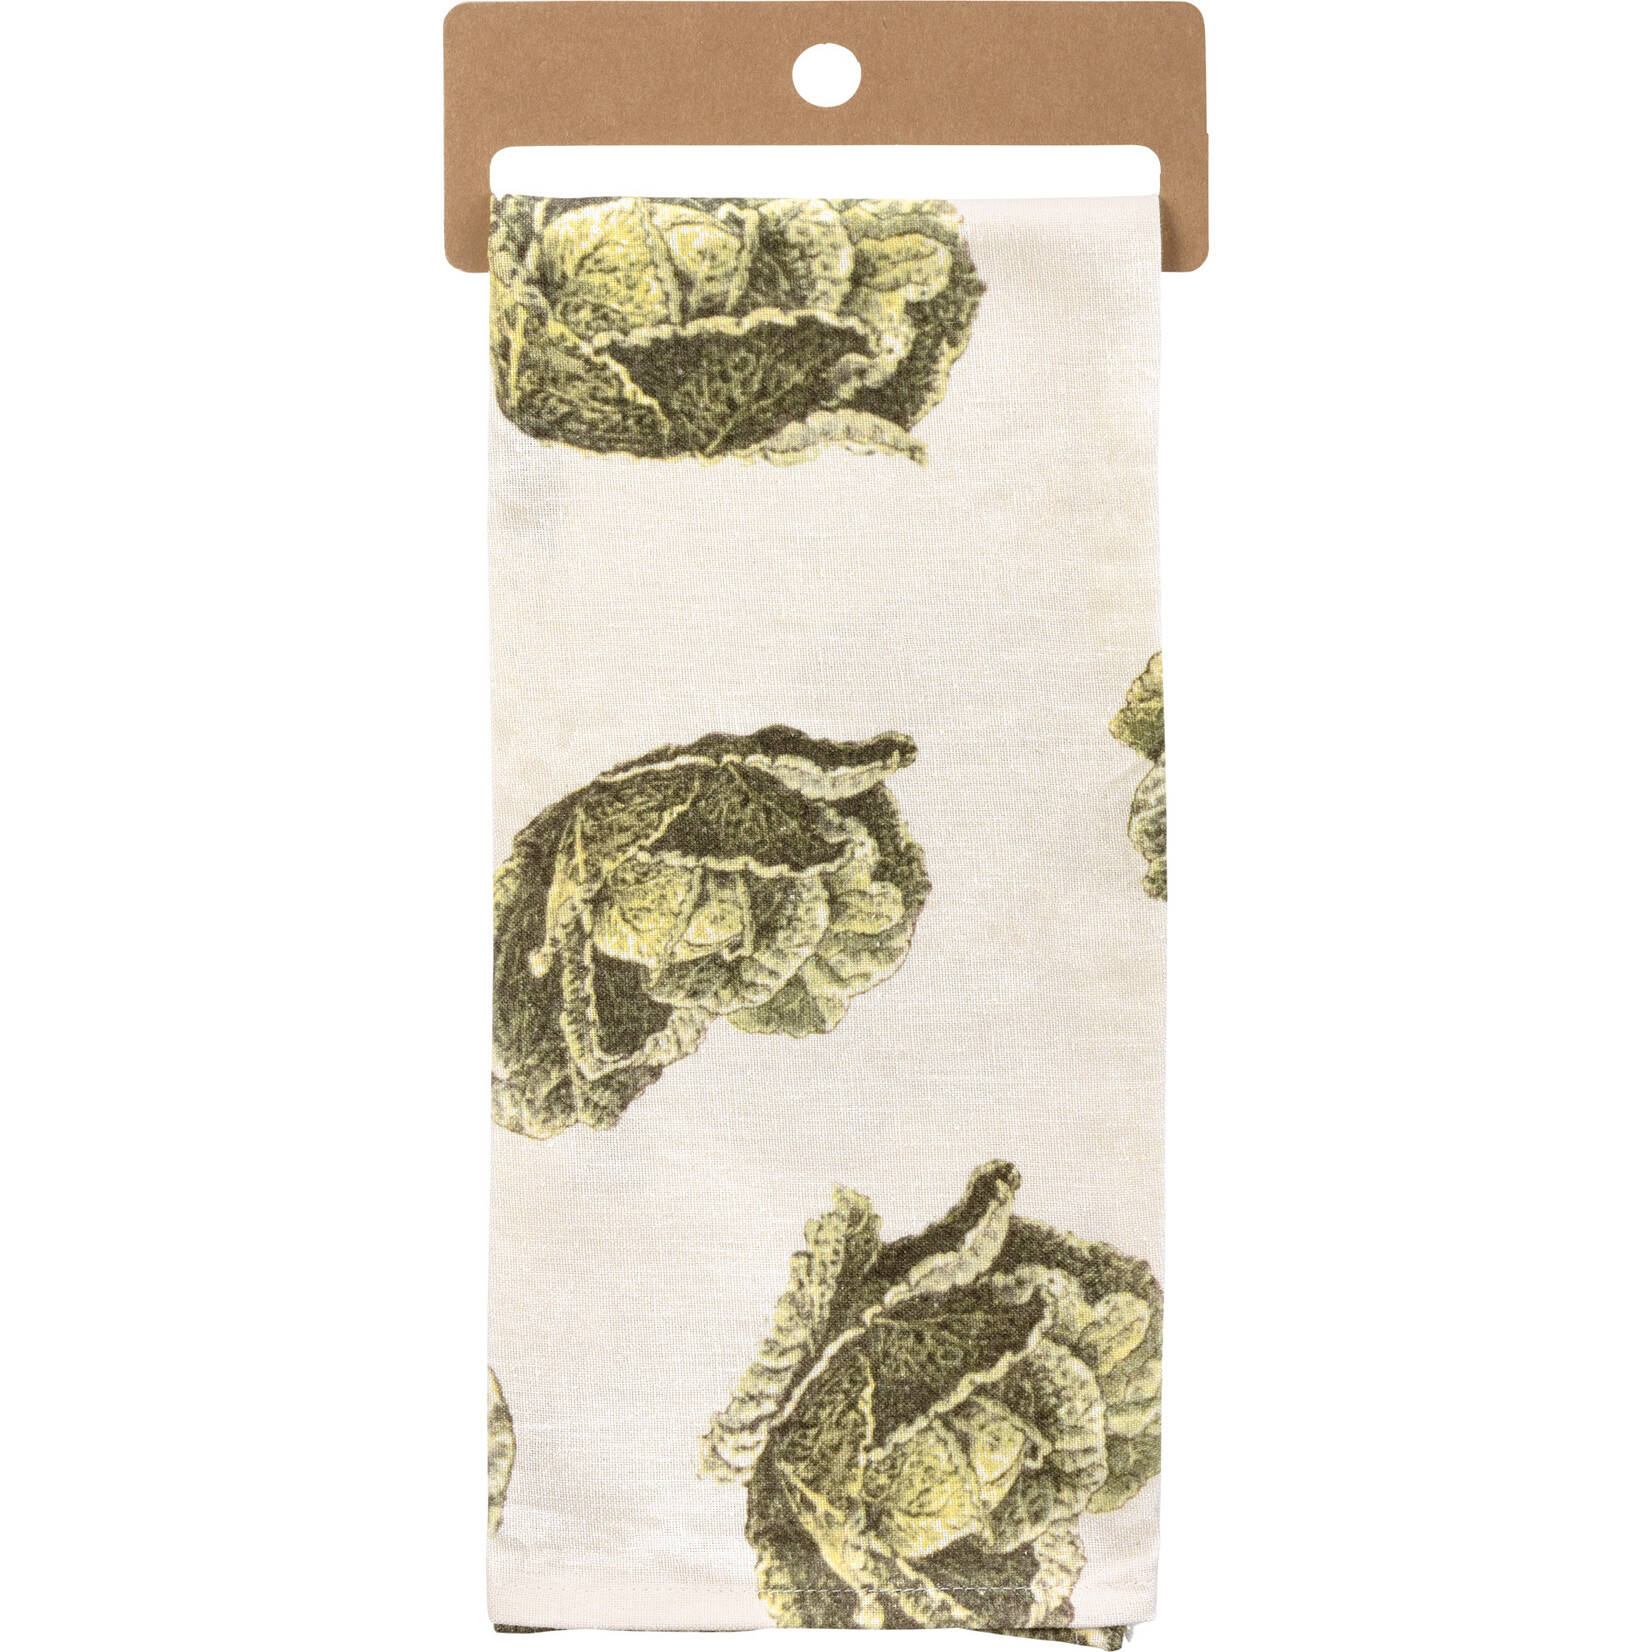 Primitives by Kathy Primitives by Kathy Oh, Kale Yeah Kitchen Towel